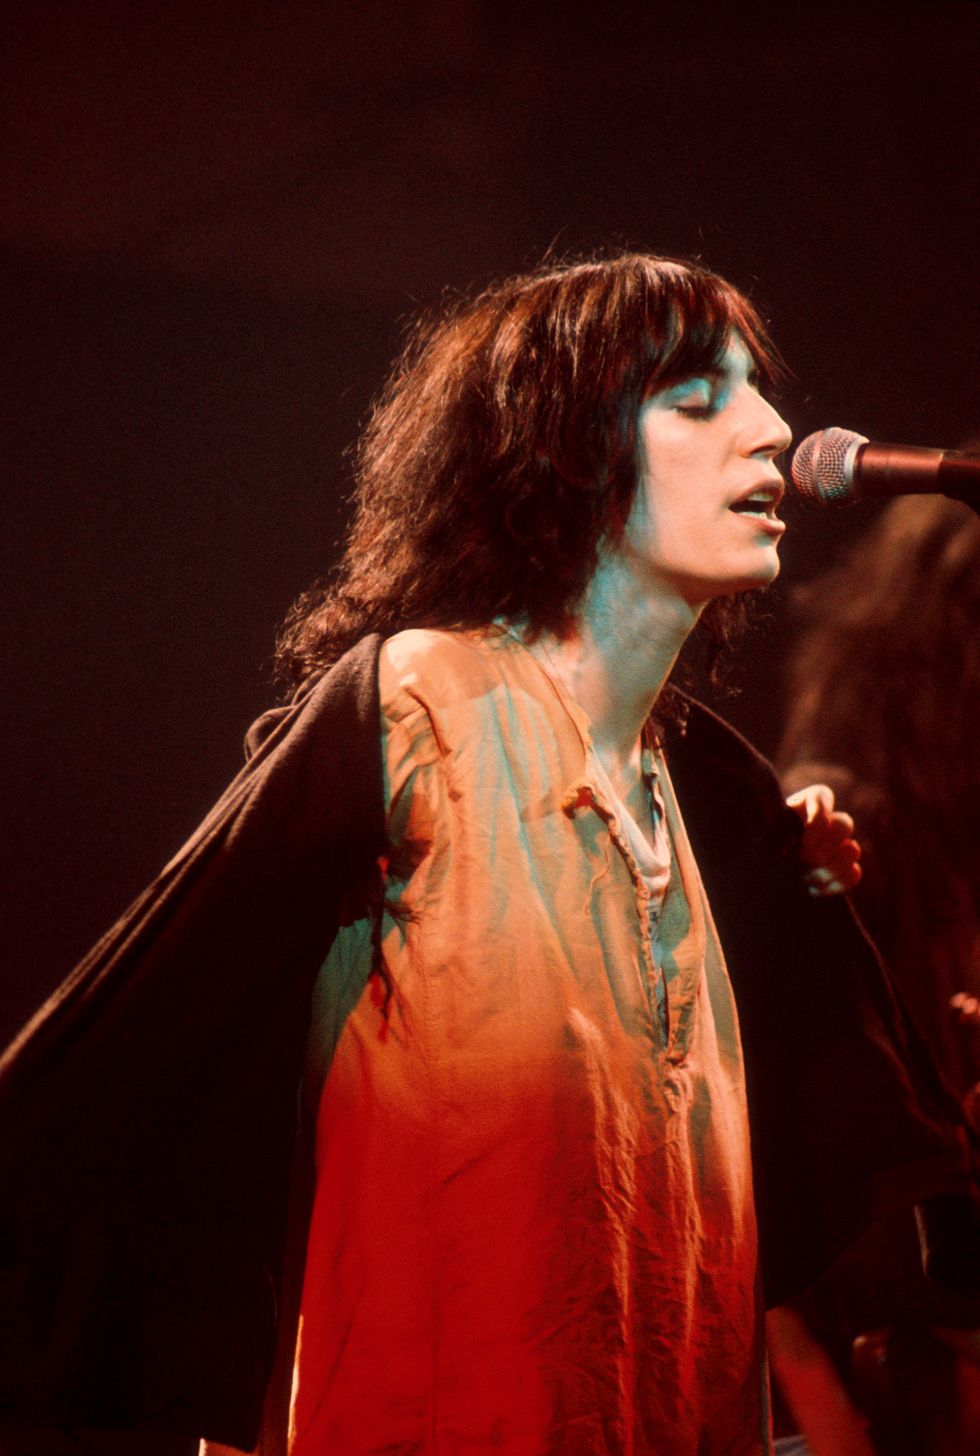 Patti Smith performs on stage, New York, 1976. (Photo by Michael Putland/Getty Images)